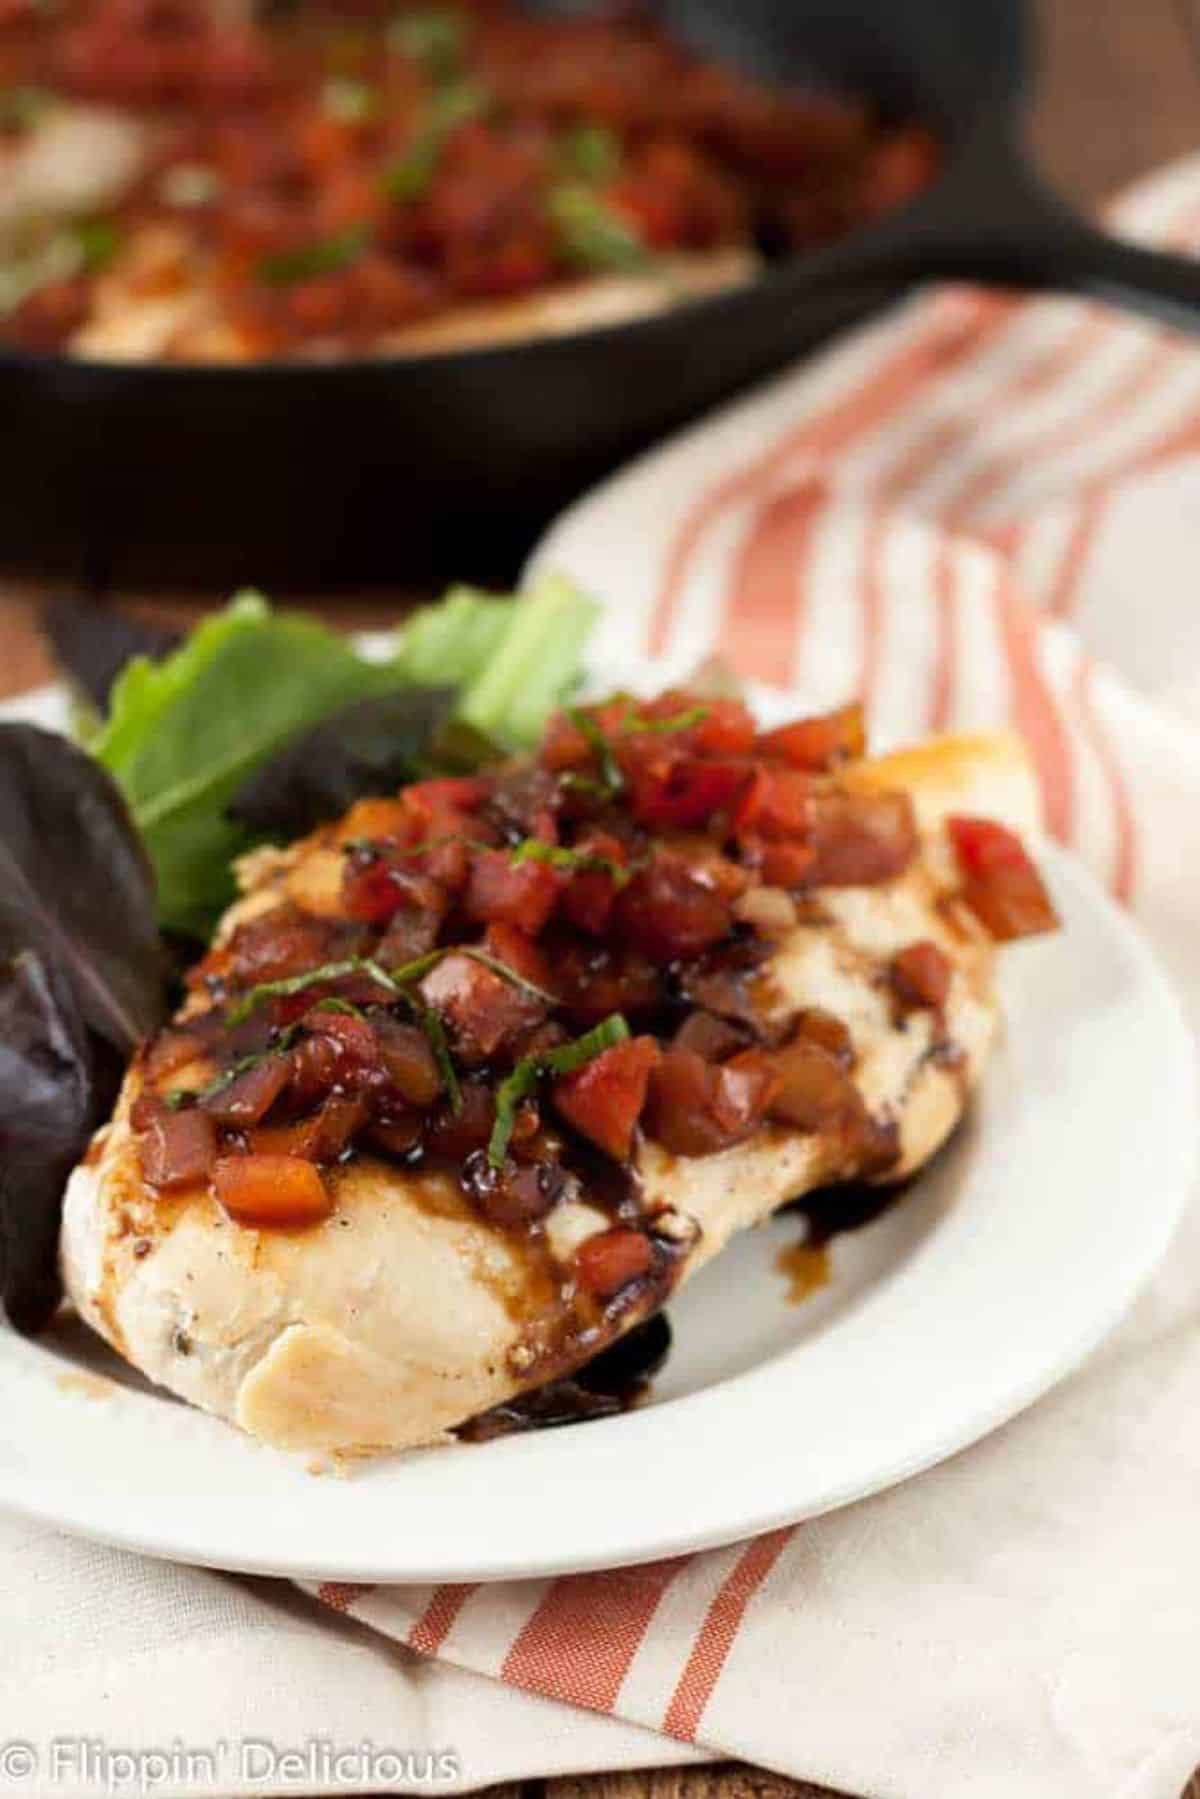 Mouth-watering Gluten-Free and Dairy-Free Bruschetta Chicken Skillet with salad on a white plate.